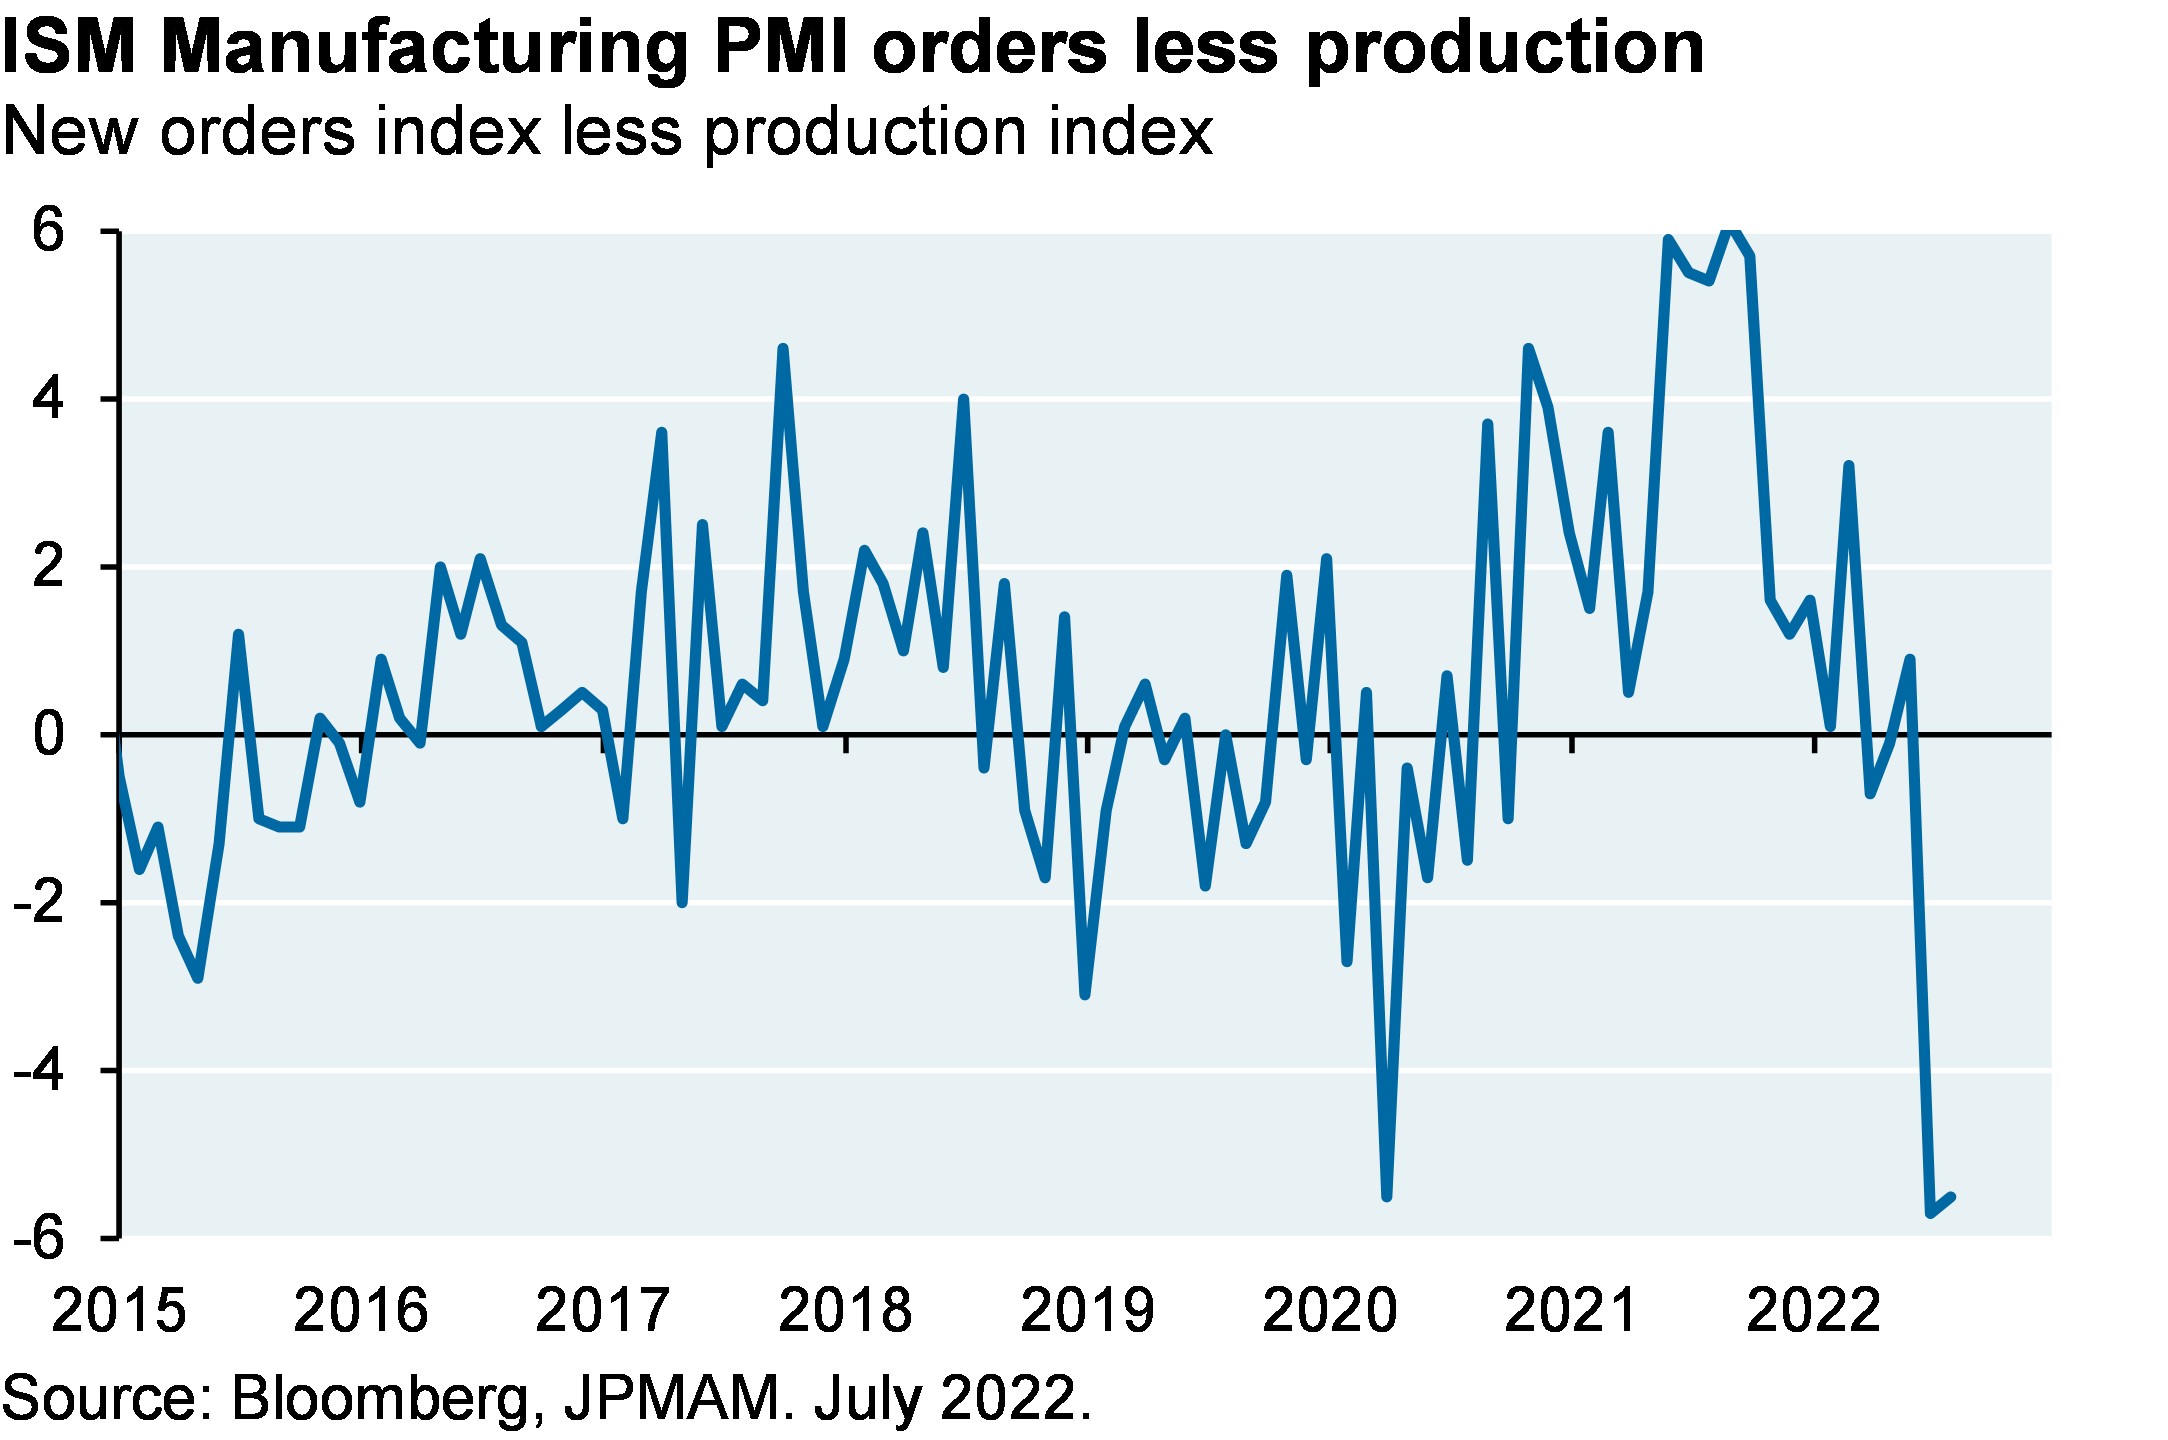 ISM Manufacturing PMI orders less production